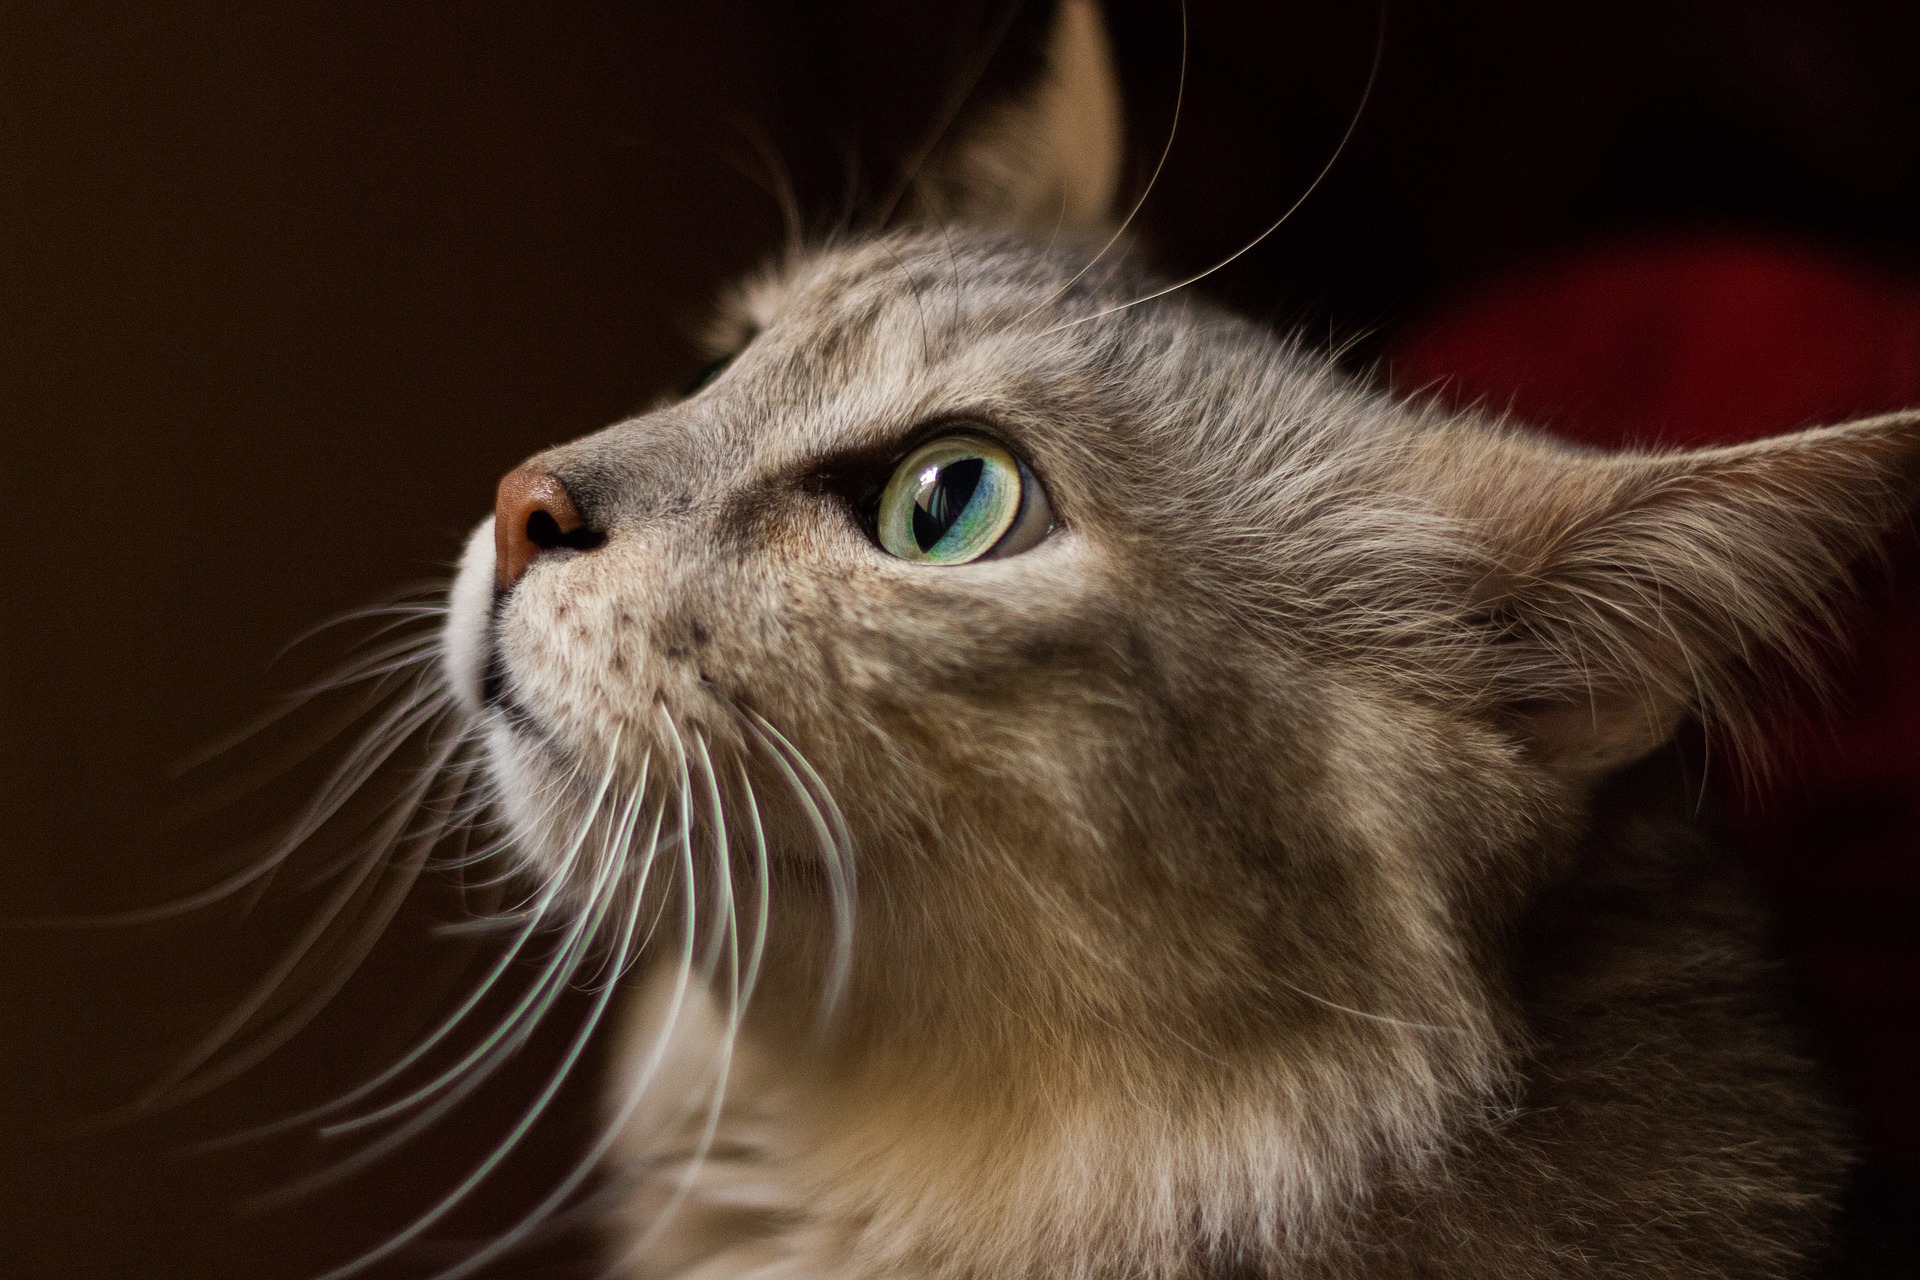 close up of face of long haired grey cat with bright green eyes looking up